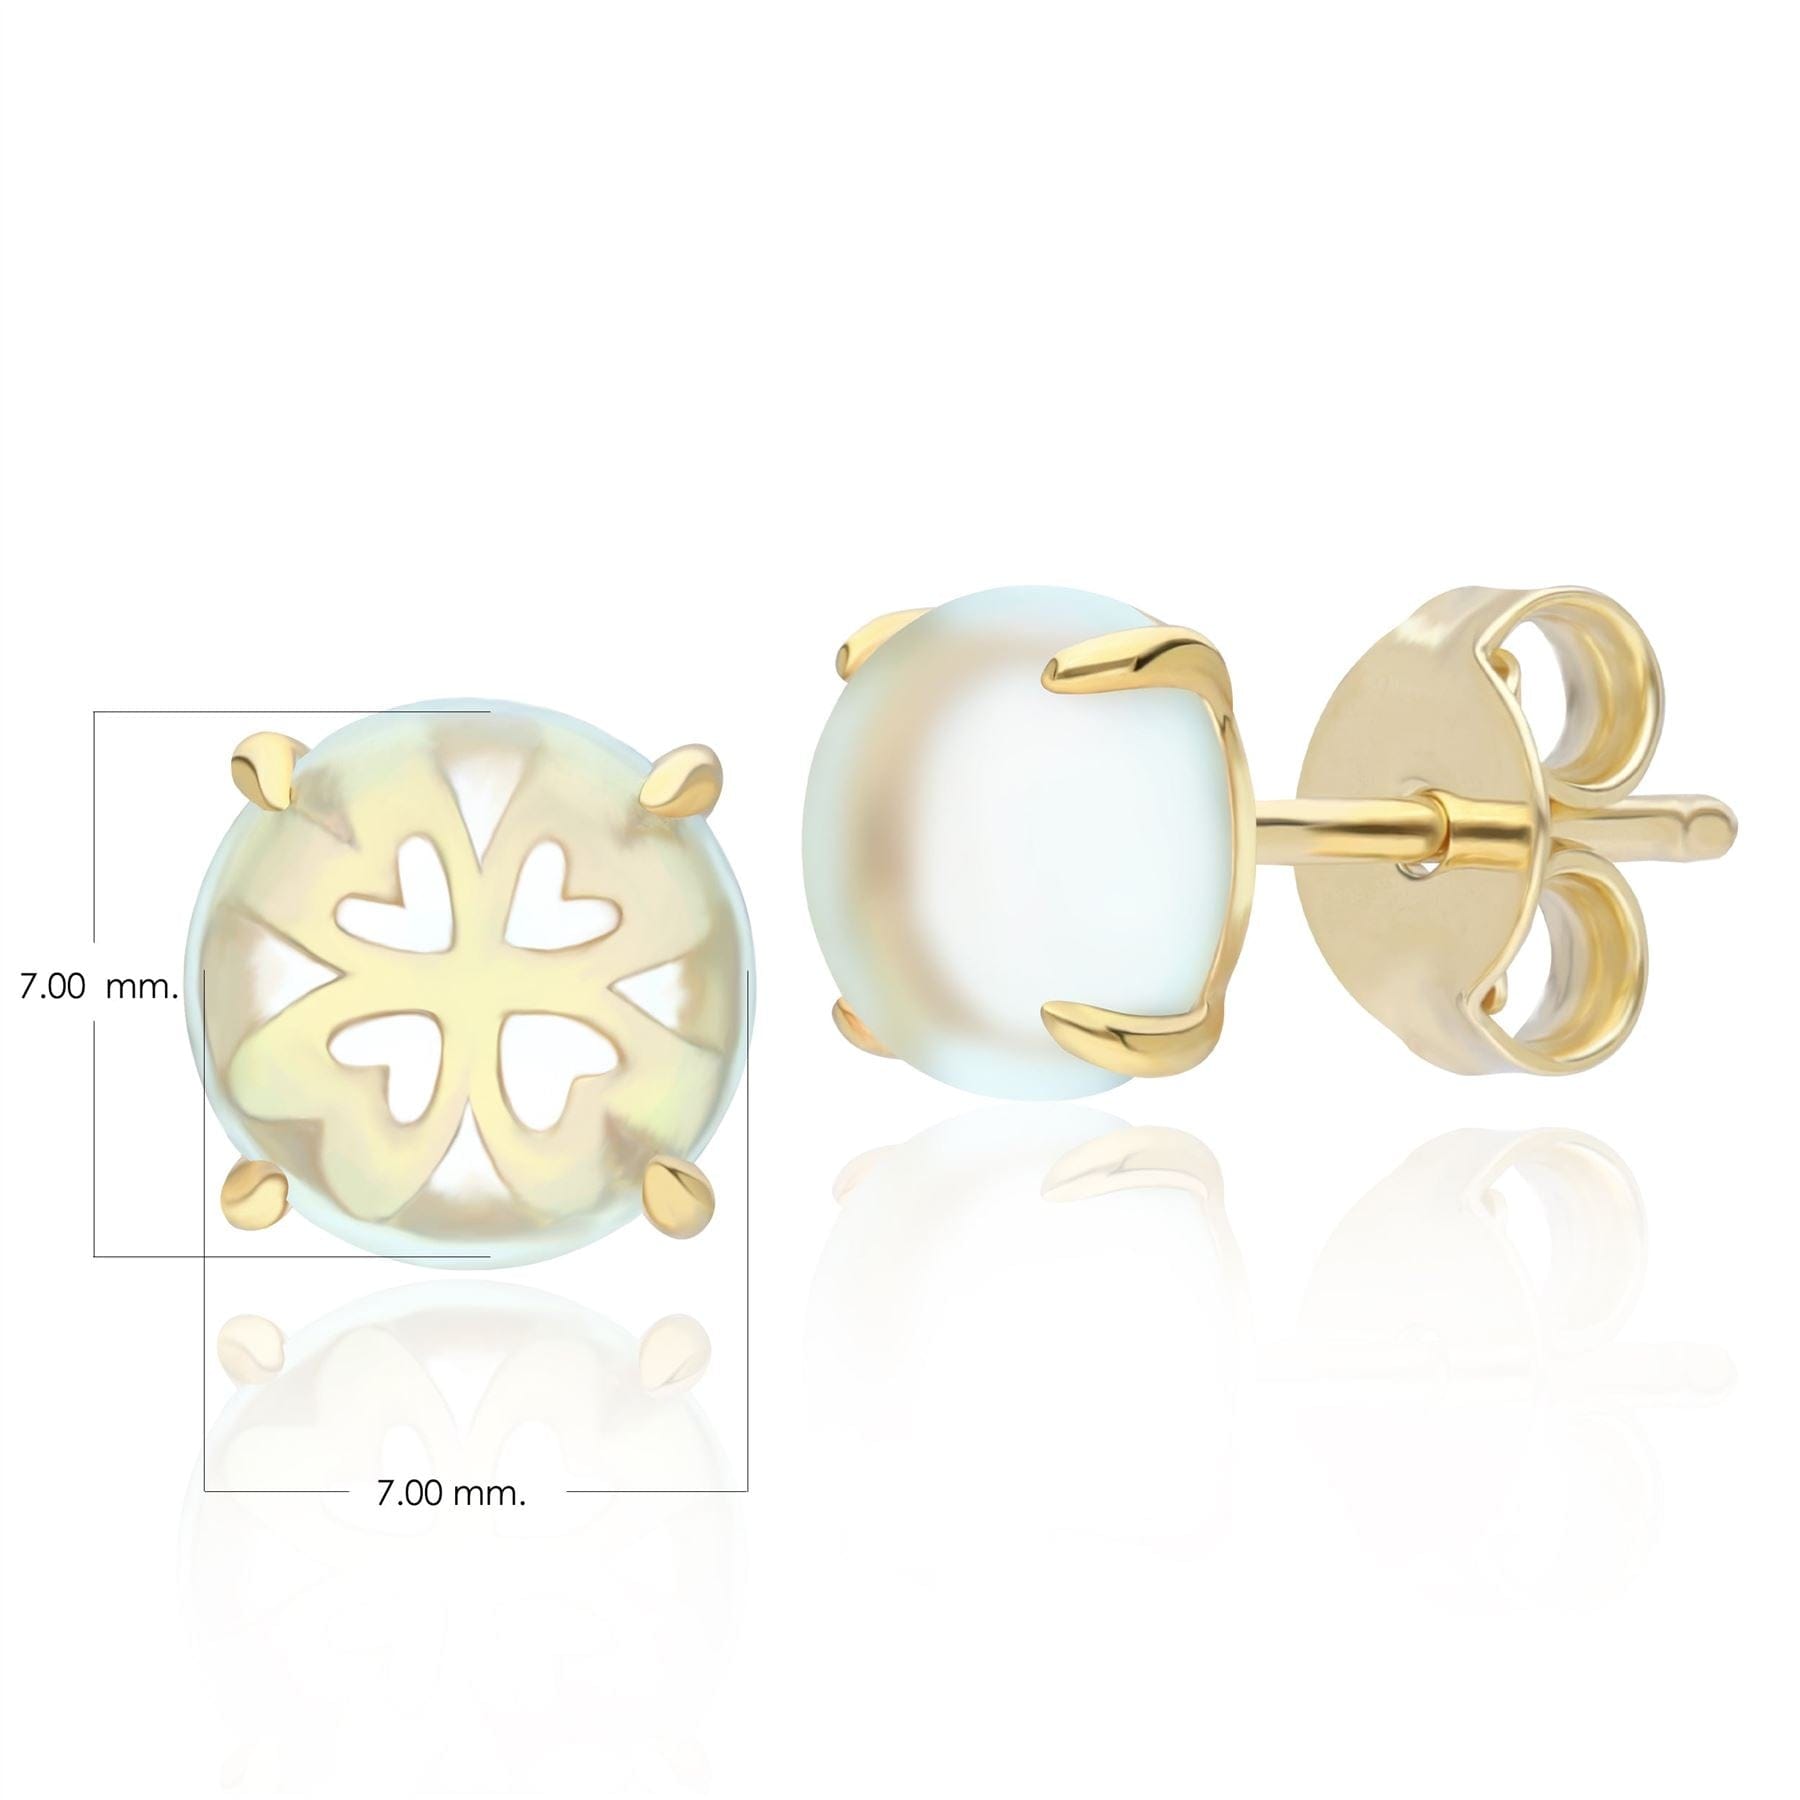 253E391803925 Gardenia Green Mint Quartz Cabochon Stud Earrings in Gold Plated Sterling Silver Dimensions